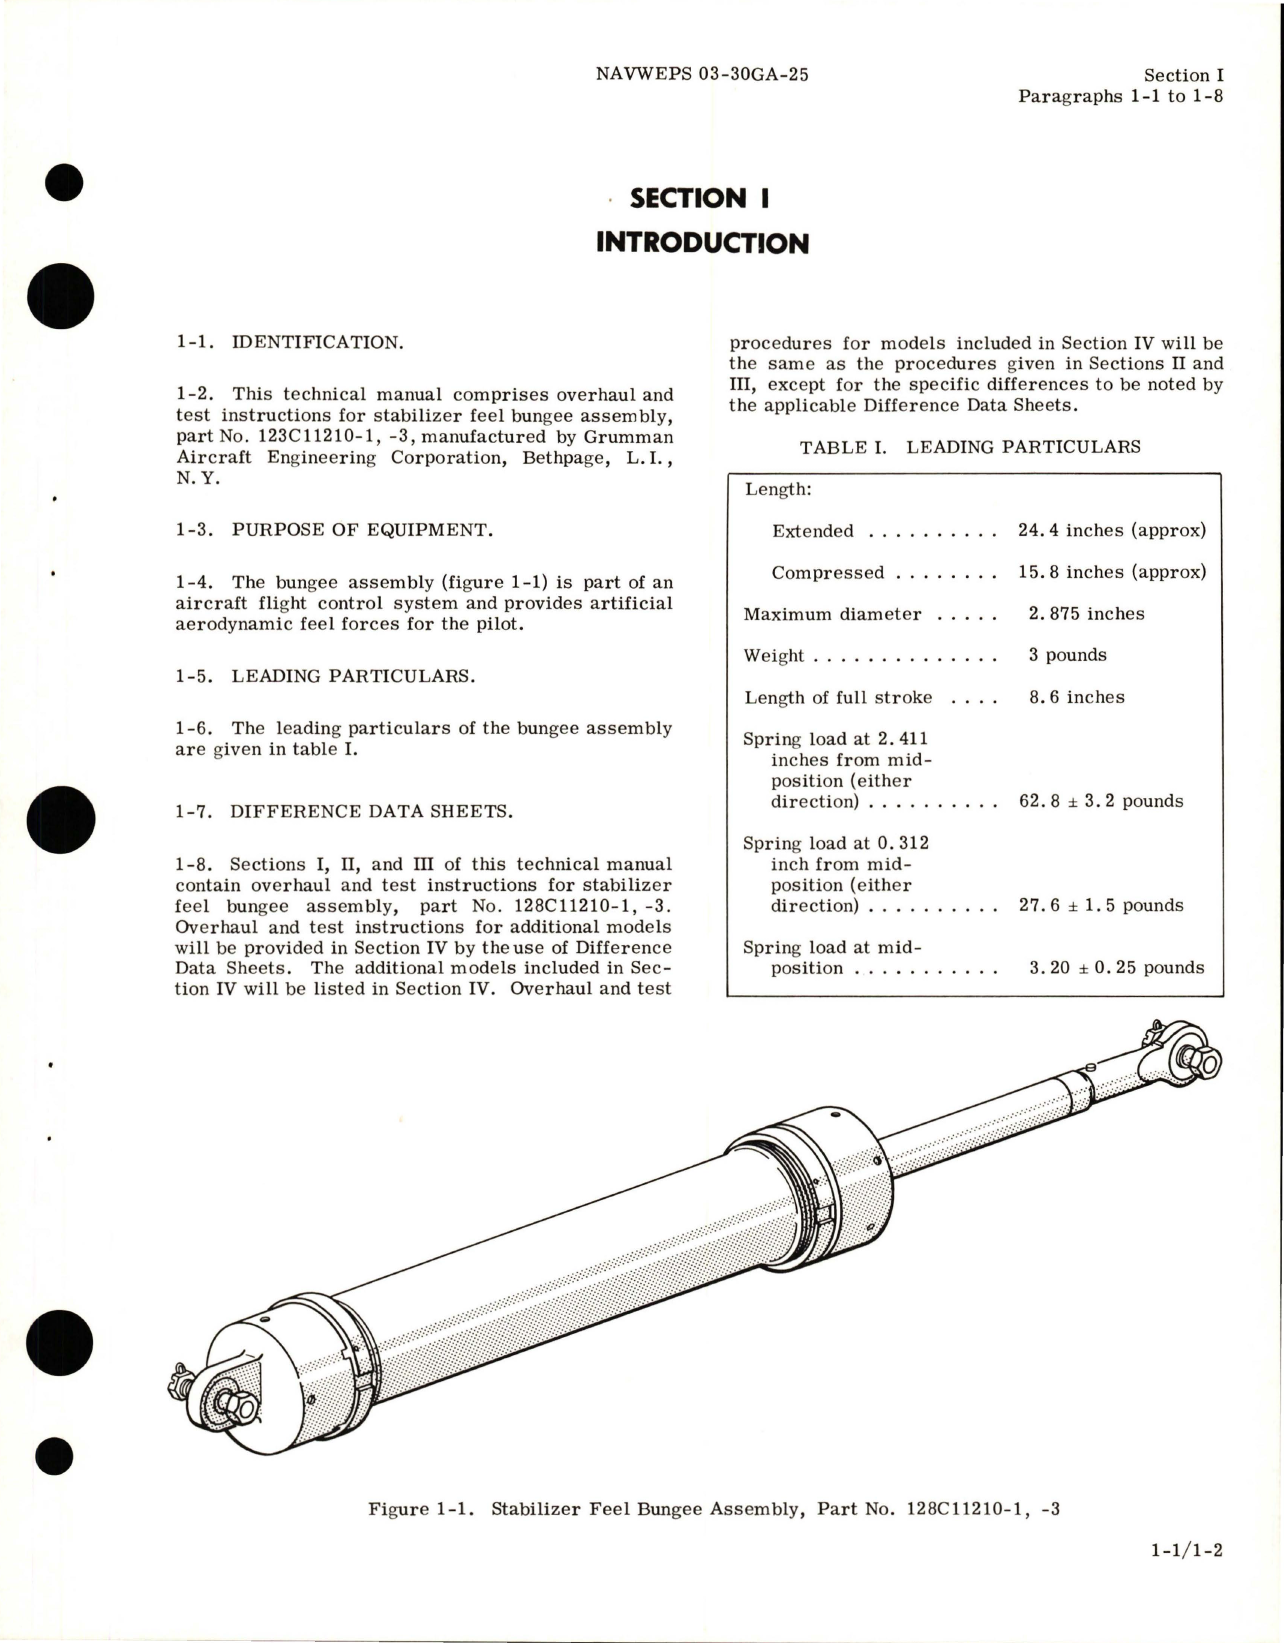 Sample page 5 from AirCorps Library document: Overhaul Instructions for Stabilizer Feel Bungee Assembly - Part 128C11210-1 and 128C11210-3 